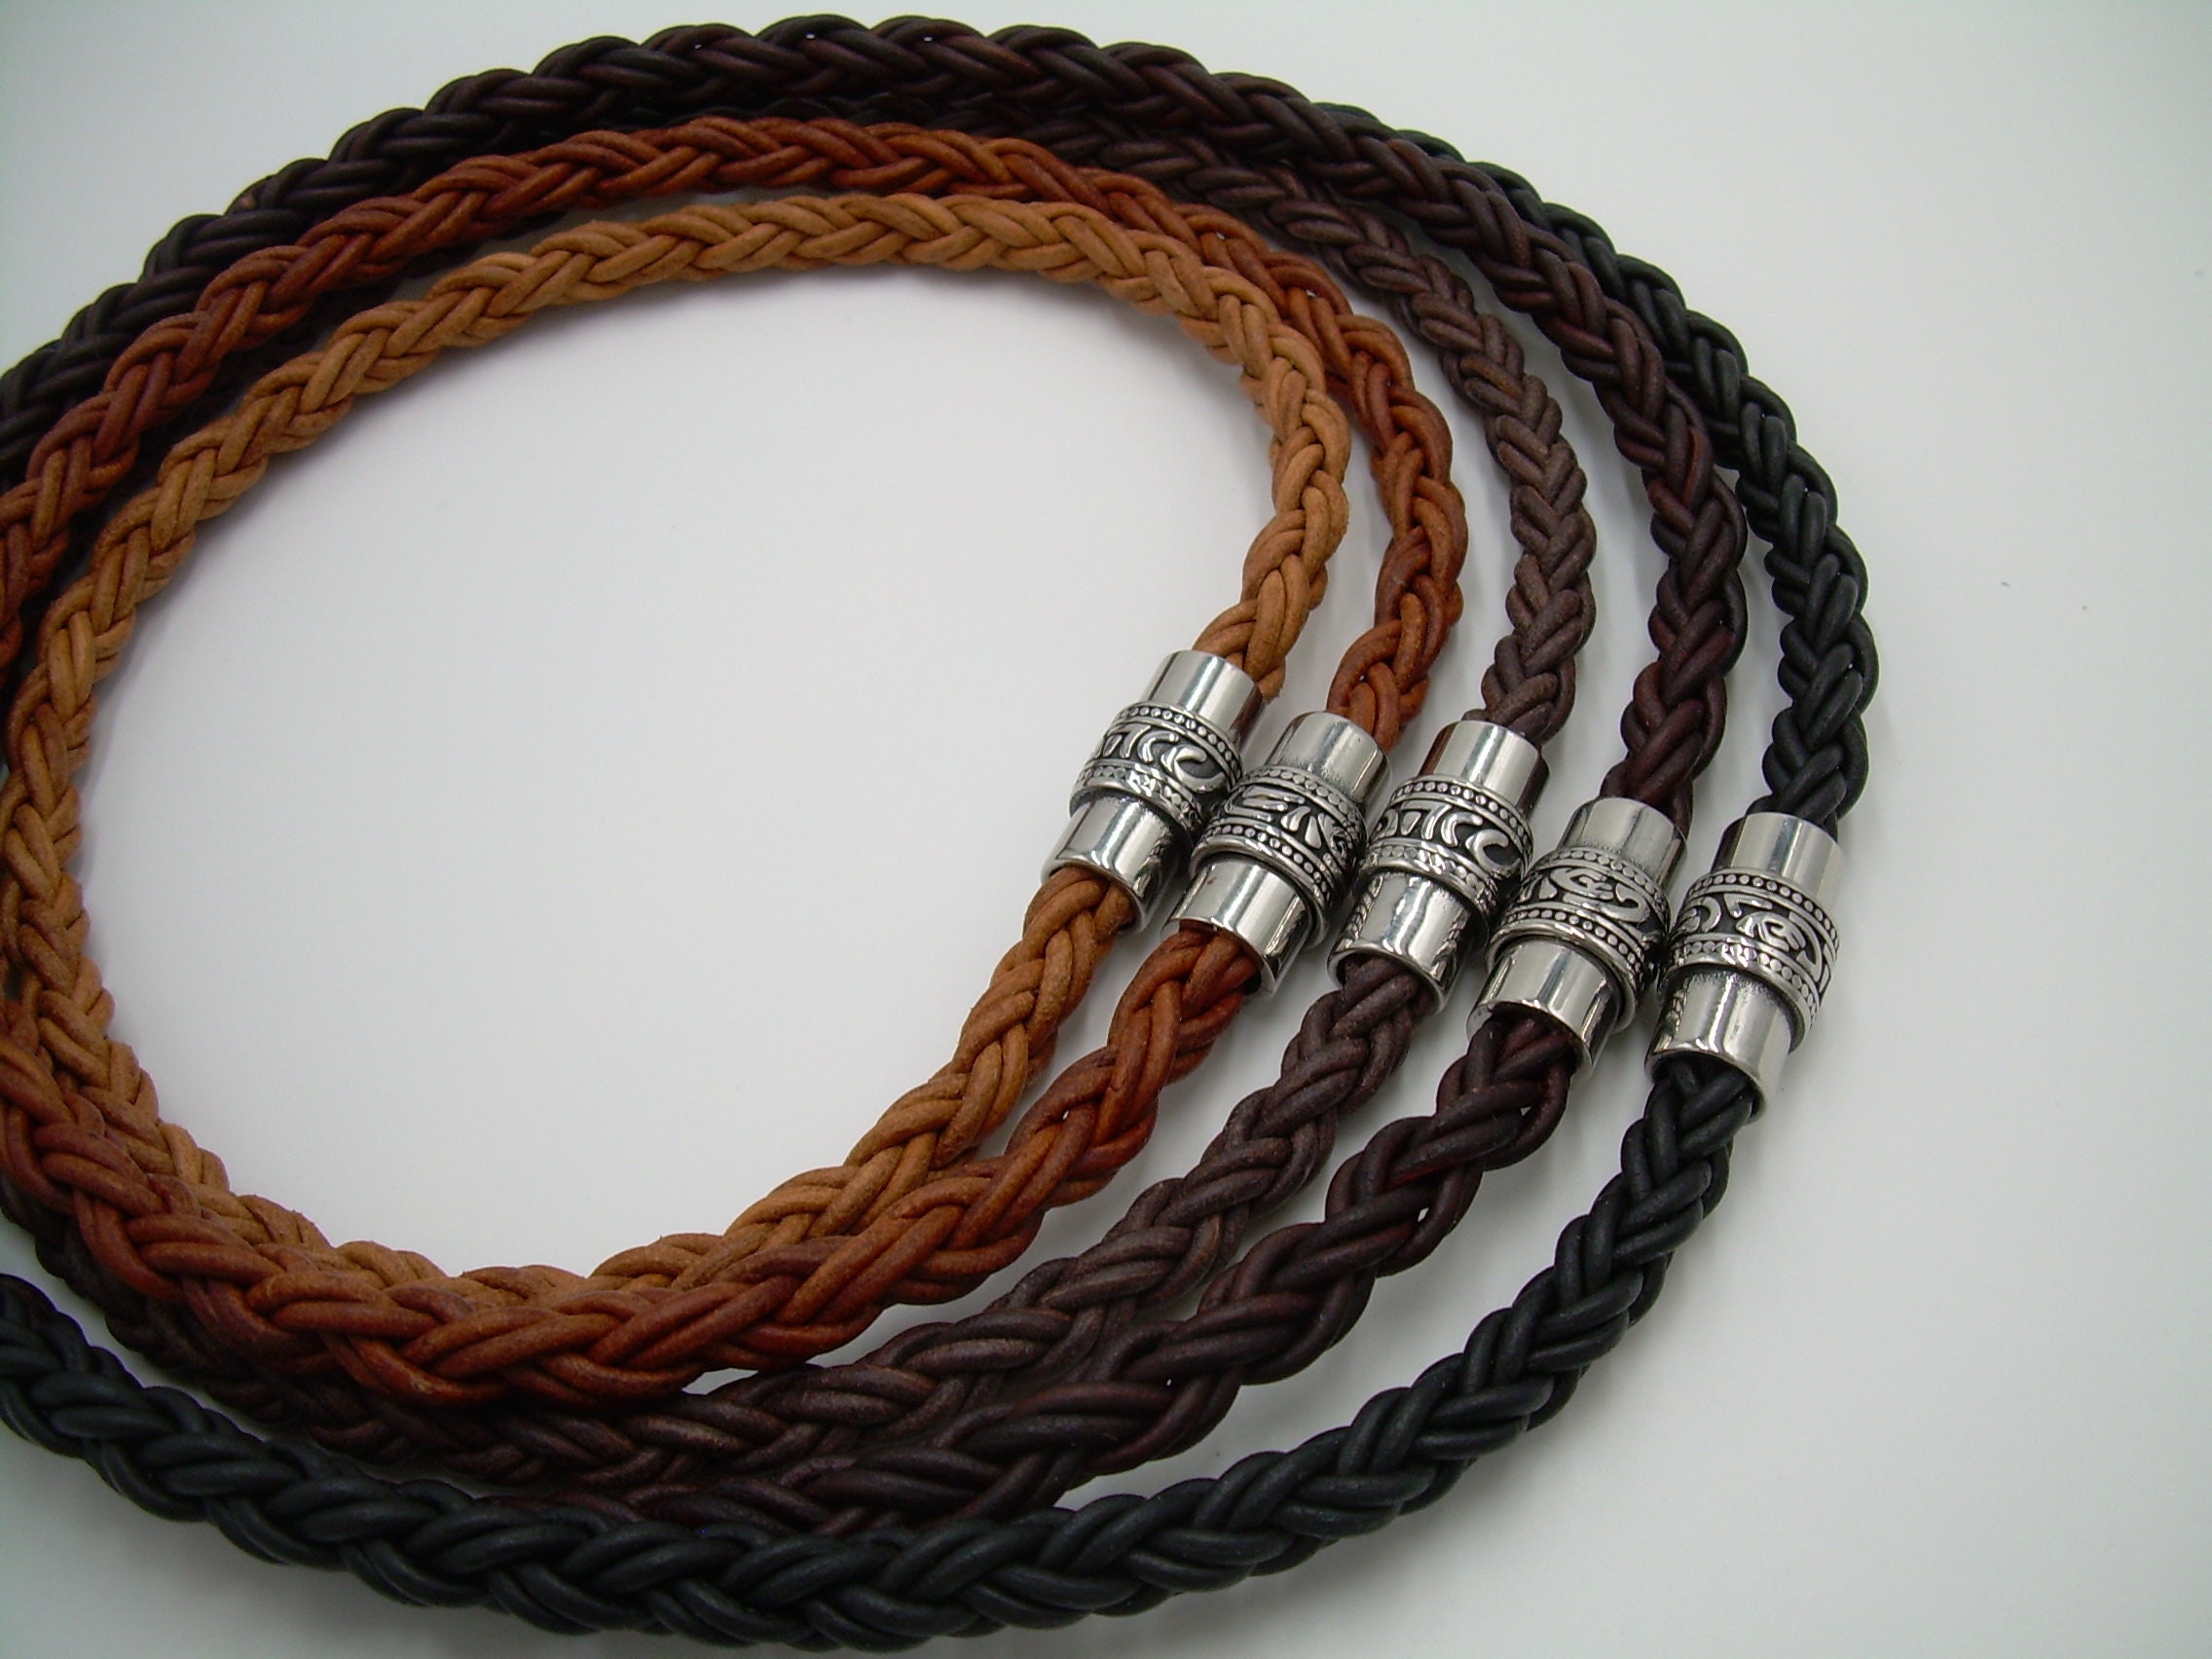 Handmade Mens Thick Braided Leather Necklace with Filigreed Stainless Steel  Magnetic Clasp - Genuine Leather Necklace for Men - Available sizes